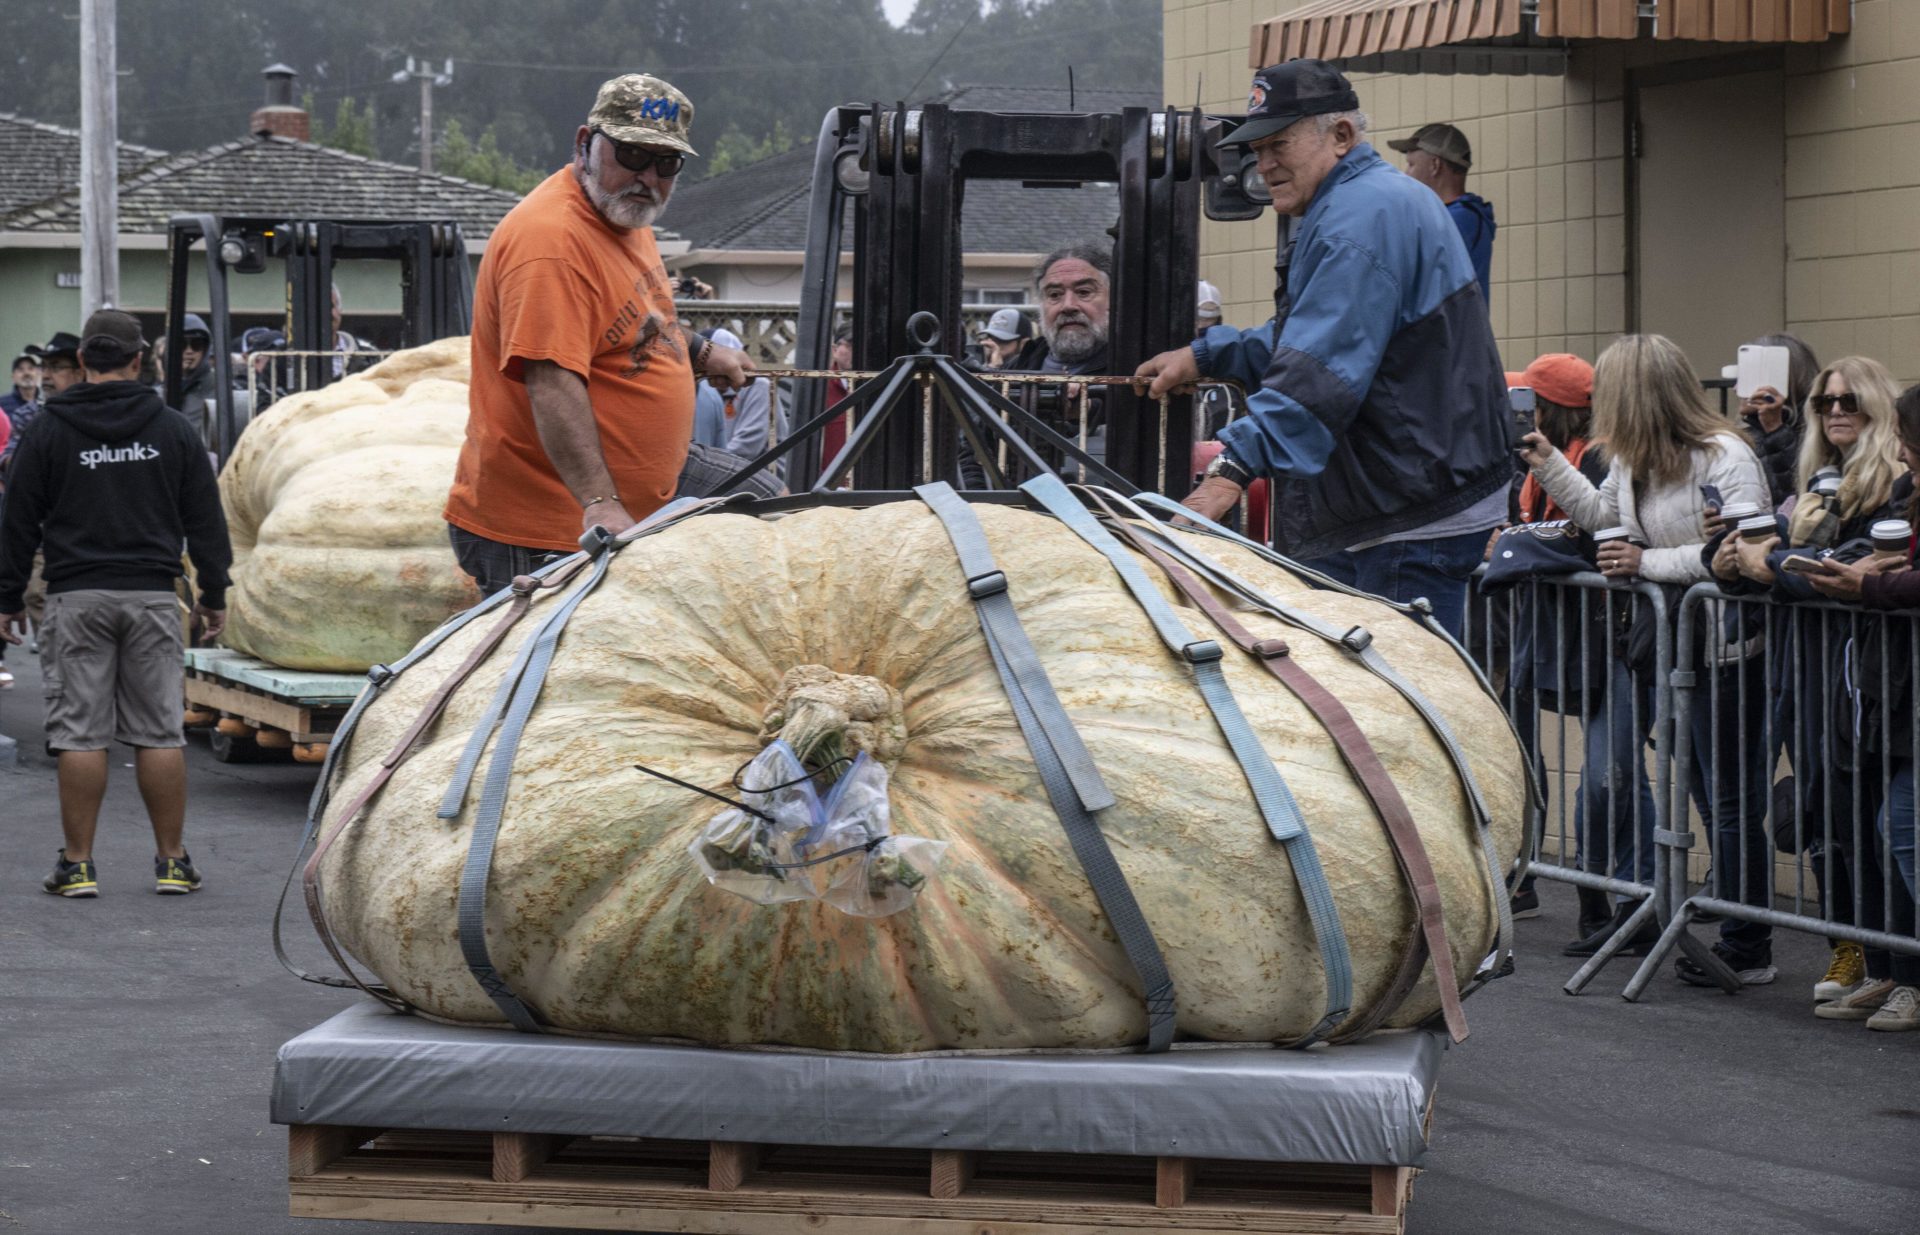 Travis Gienger's pumpkin is forklifted to be weighed at the World Championship Pumpkin Weigh-off in California.